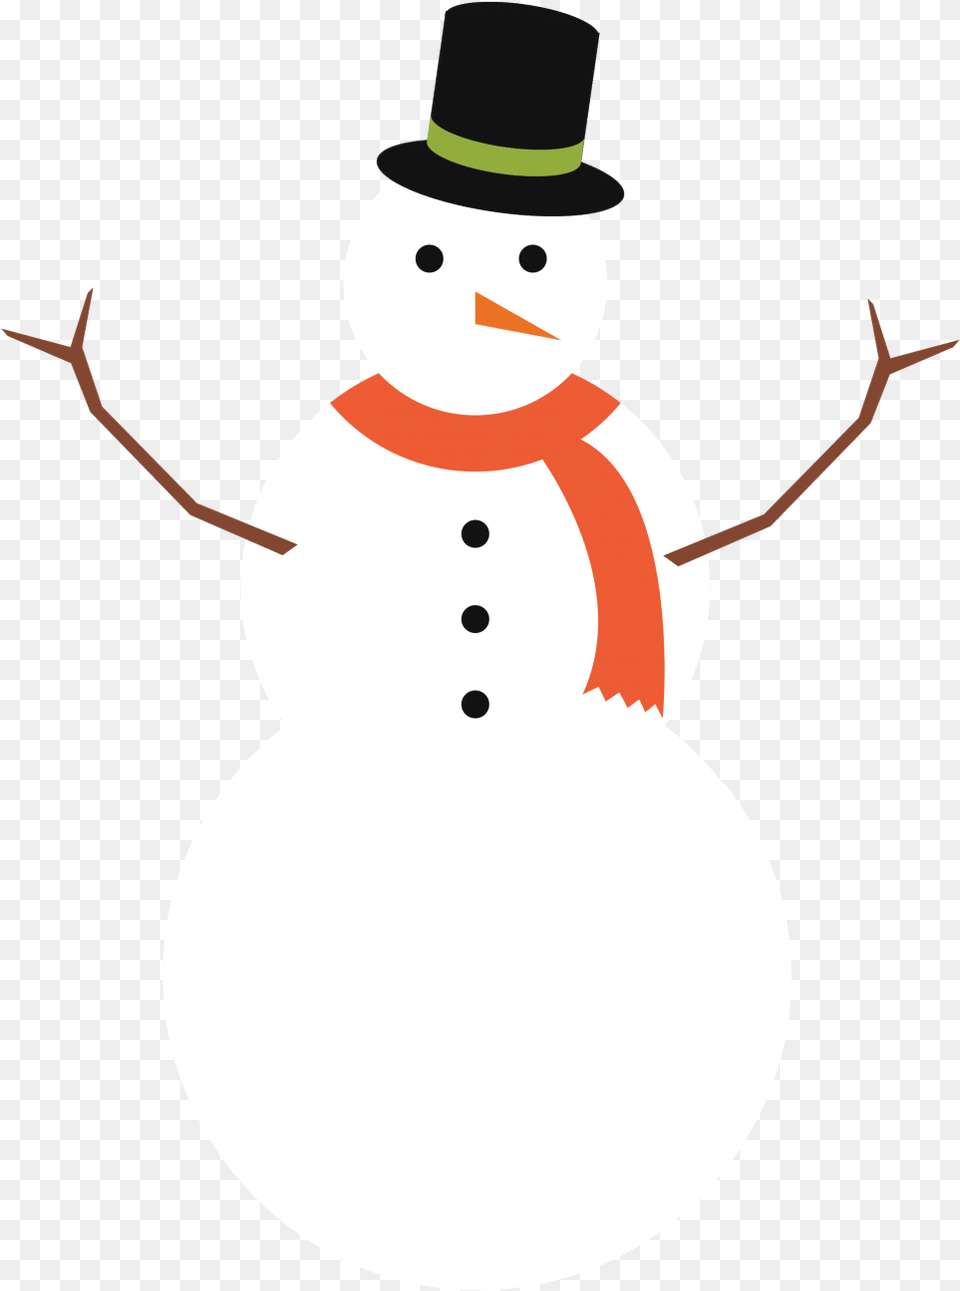 Free Snowman Clipart Snowman Christmas Day Snowman, Nature, Outdoors, Winter, Snow Png